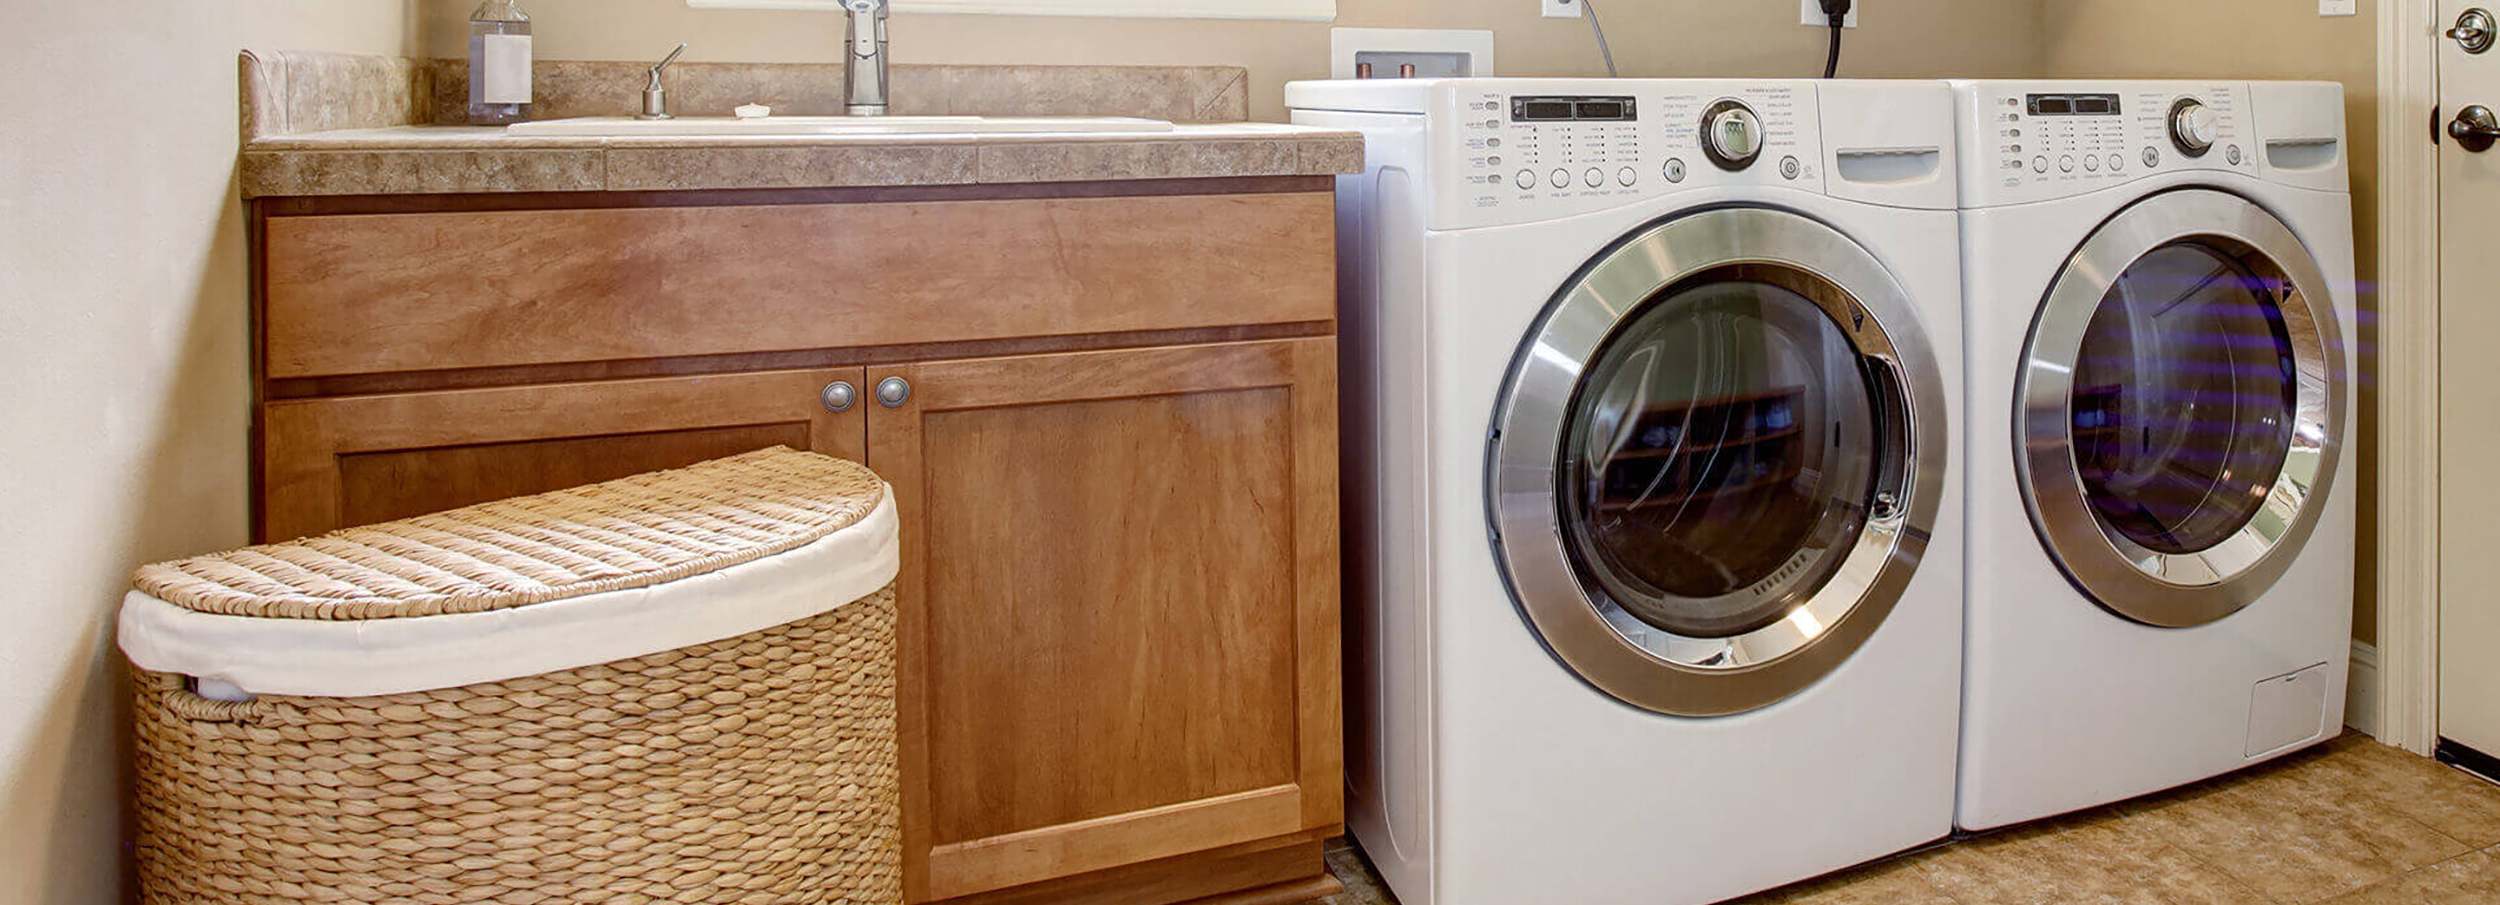 White washing machine and dryer beside sink in tidy home laundry room